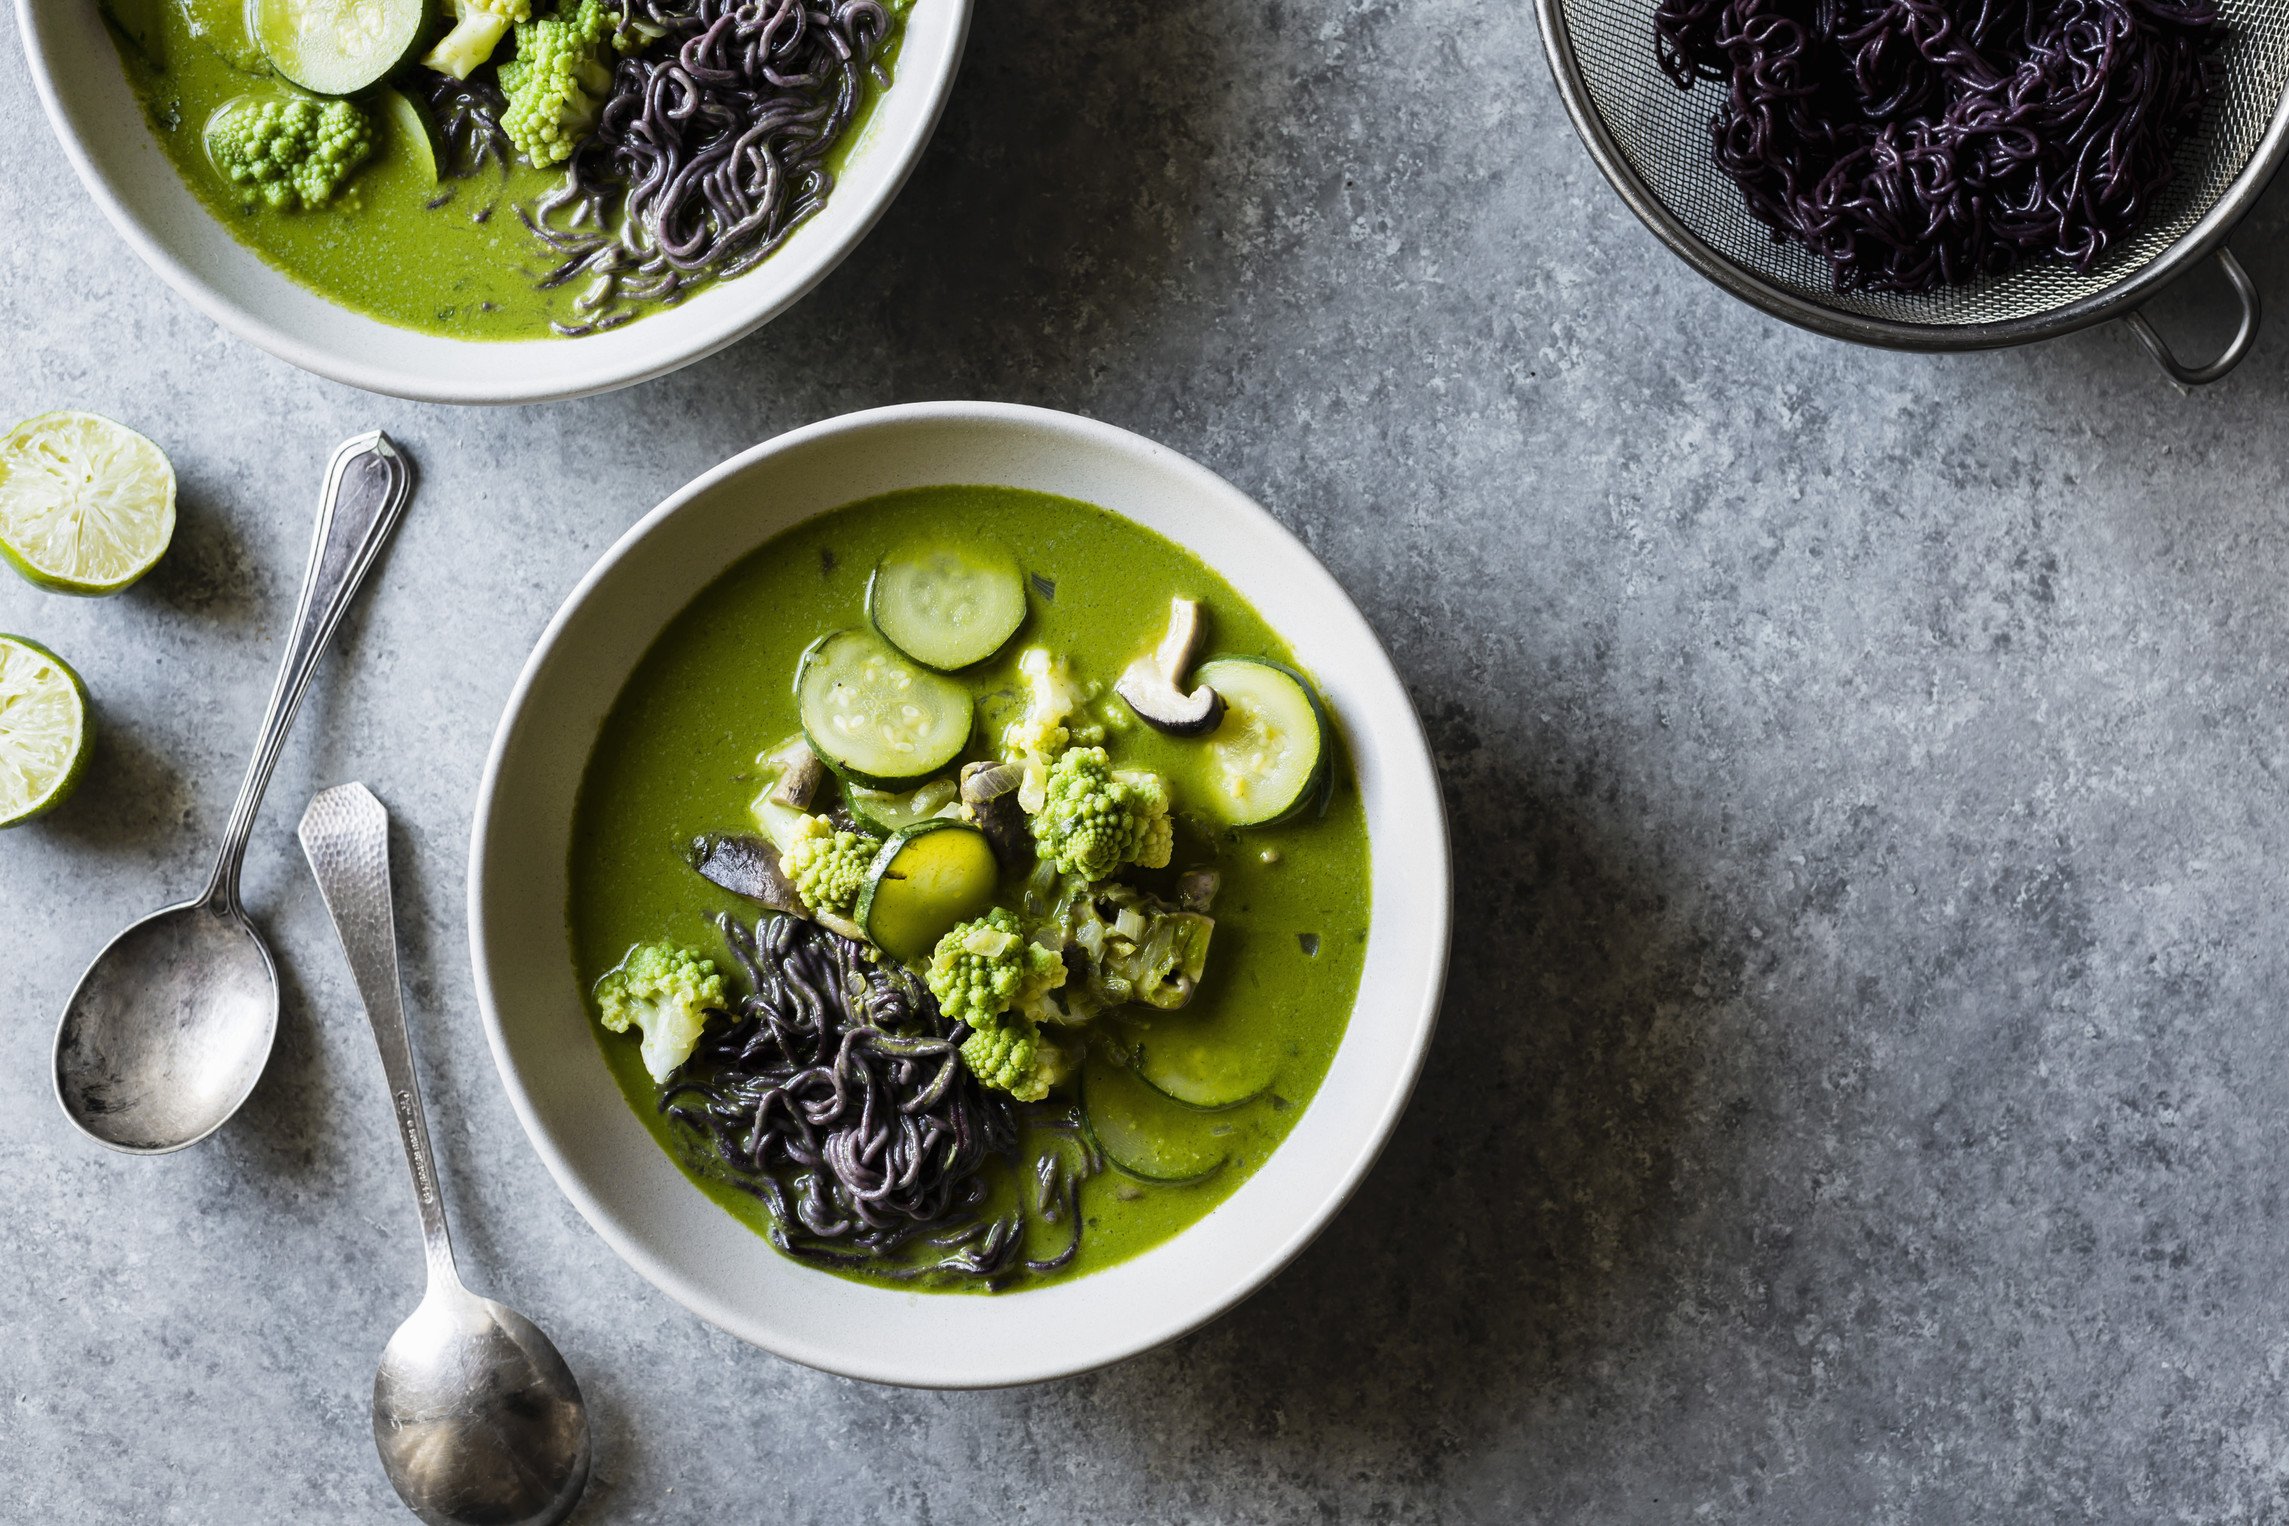 StockFood_12458077_L_Green_thai_vegetable_soup_with_cilantro_and_black_rice_noodles_Thailand.jpg